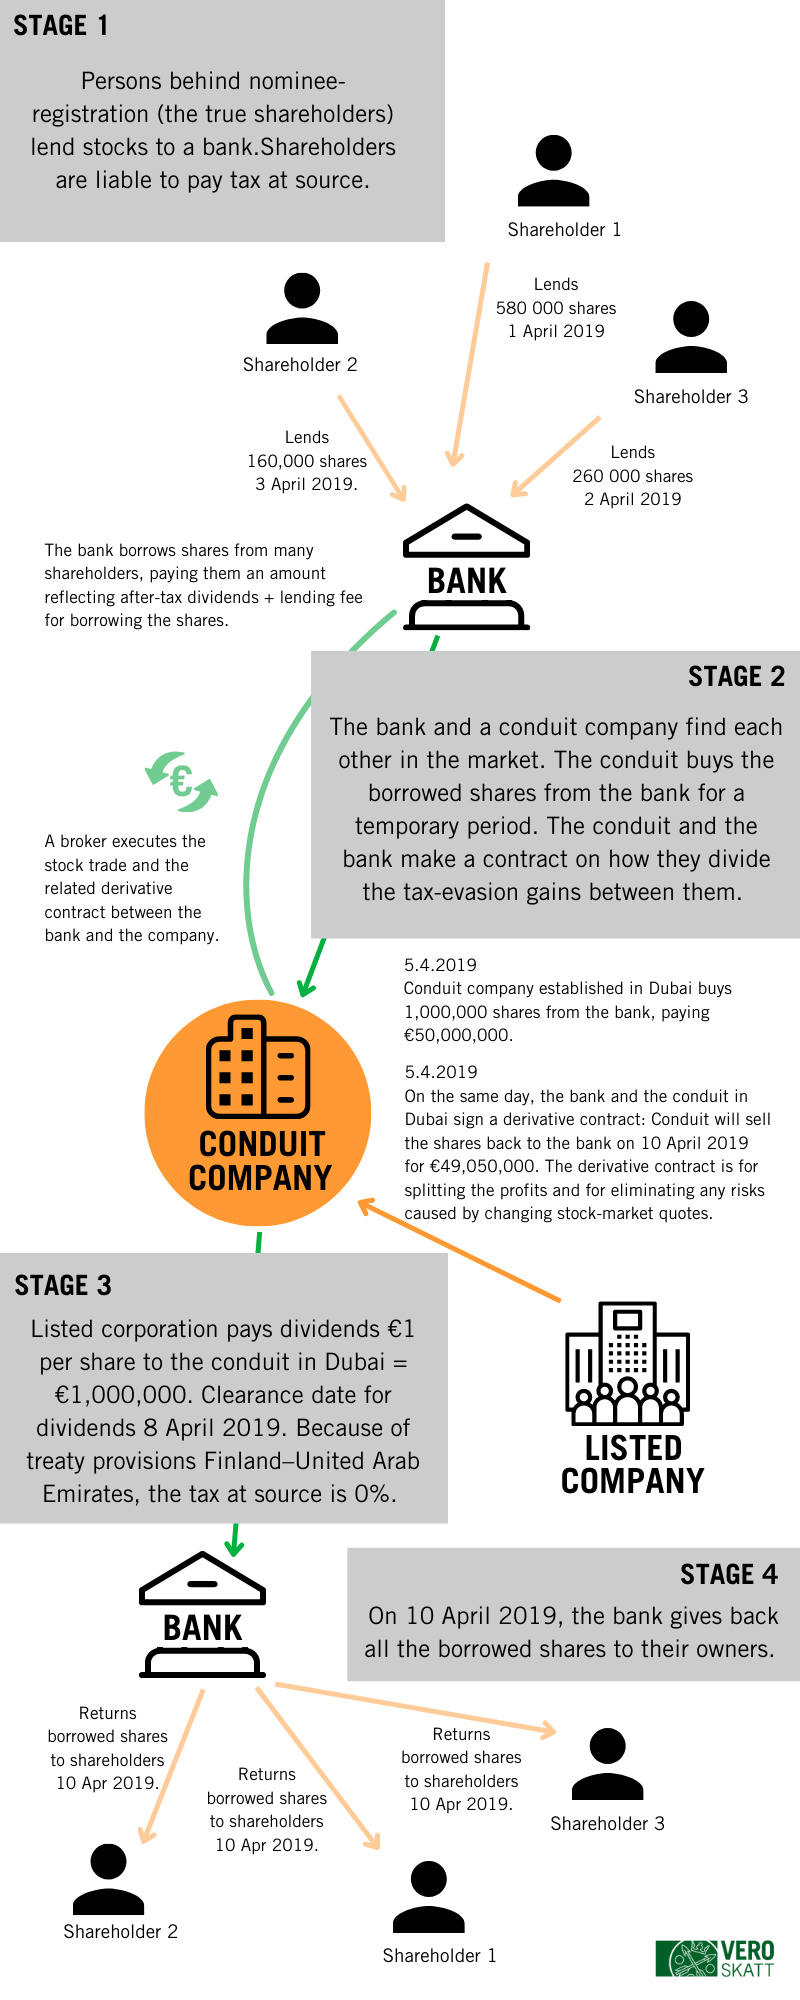 Stage 1: Persons behind nominee-registration (the true shareholders) lend stocks to a bank.Shareholders are liable to pay tax at source. Stage 2: The bank and a conduit company find each other in the market. The conduit buys the borrowed shares from the bank for a temporary period. The conduit and the bank make a contract on how they divide the tax-evasion gains between them. Stage 3: Listed corporation pays dividends €1 per share to the conduit in Dubai = €1,000,000. Clearance date for dividends 8 April 2019. Because of treaty provisions Finland–United Arab Emirates, the tax at source is 0%. Stage 4: On 10 April 2019, the bank gives back all the borrowed shares to their owners. 